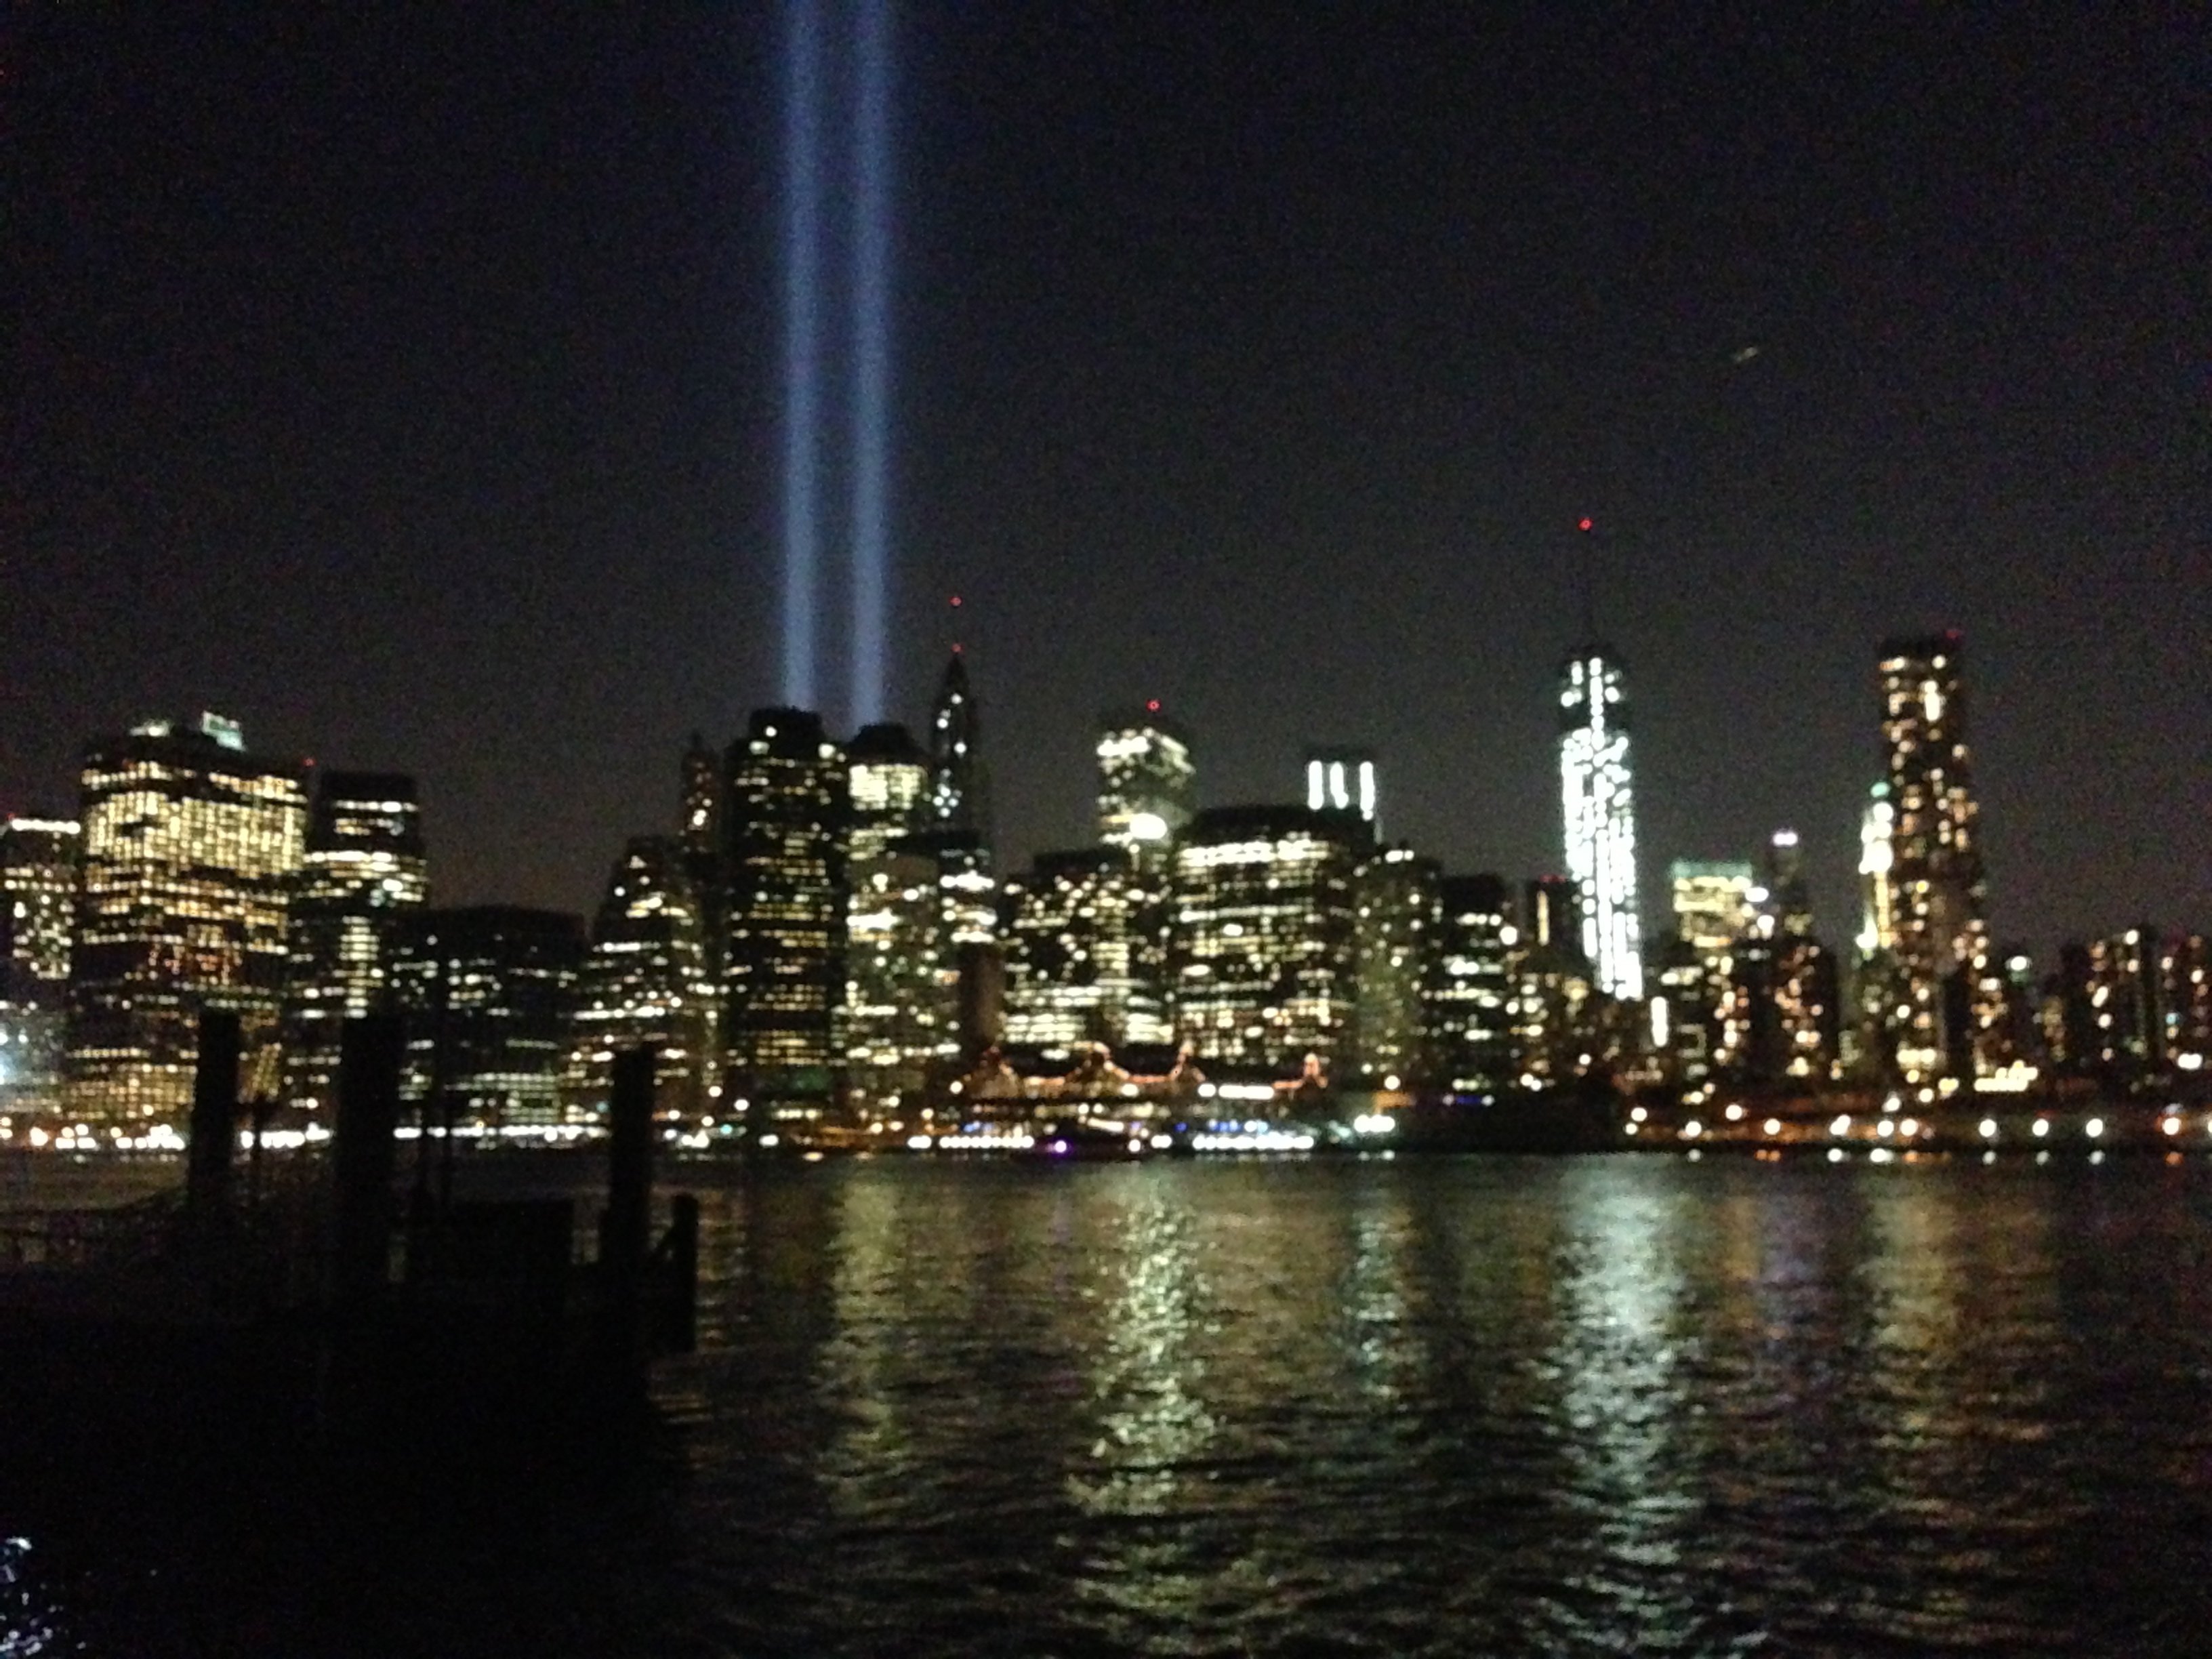 The "Tribute in Light" will return for one night as a tribute to all those who were lost on September 11th. 

The lights are located at West and Morris Streets in lower Manhattan. The lights will be on beginning at sunset on September 11, 2013 and fading away at dawn on September 12th. There will be no formal program. 

The beams of light are tested the night before September 11th.